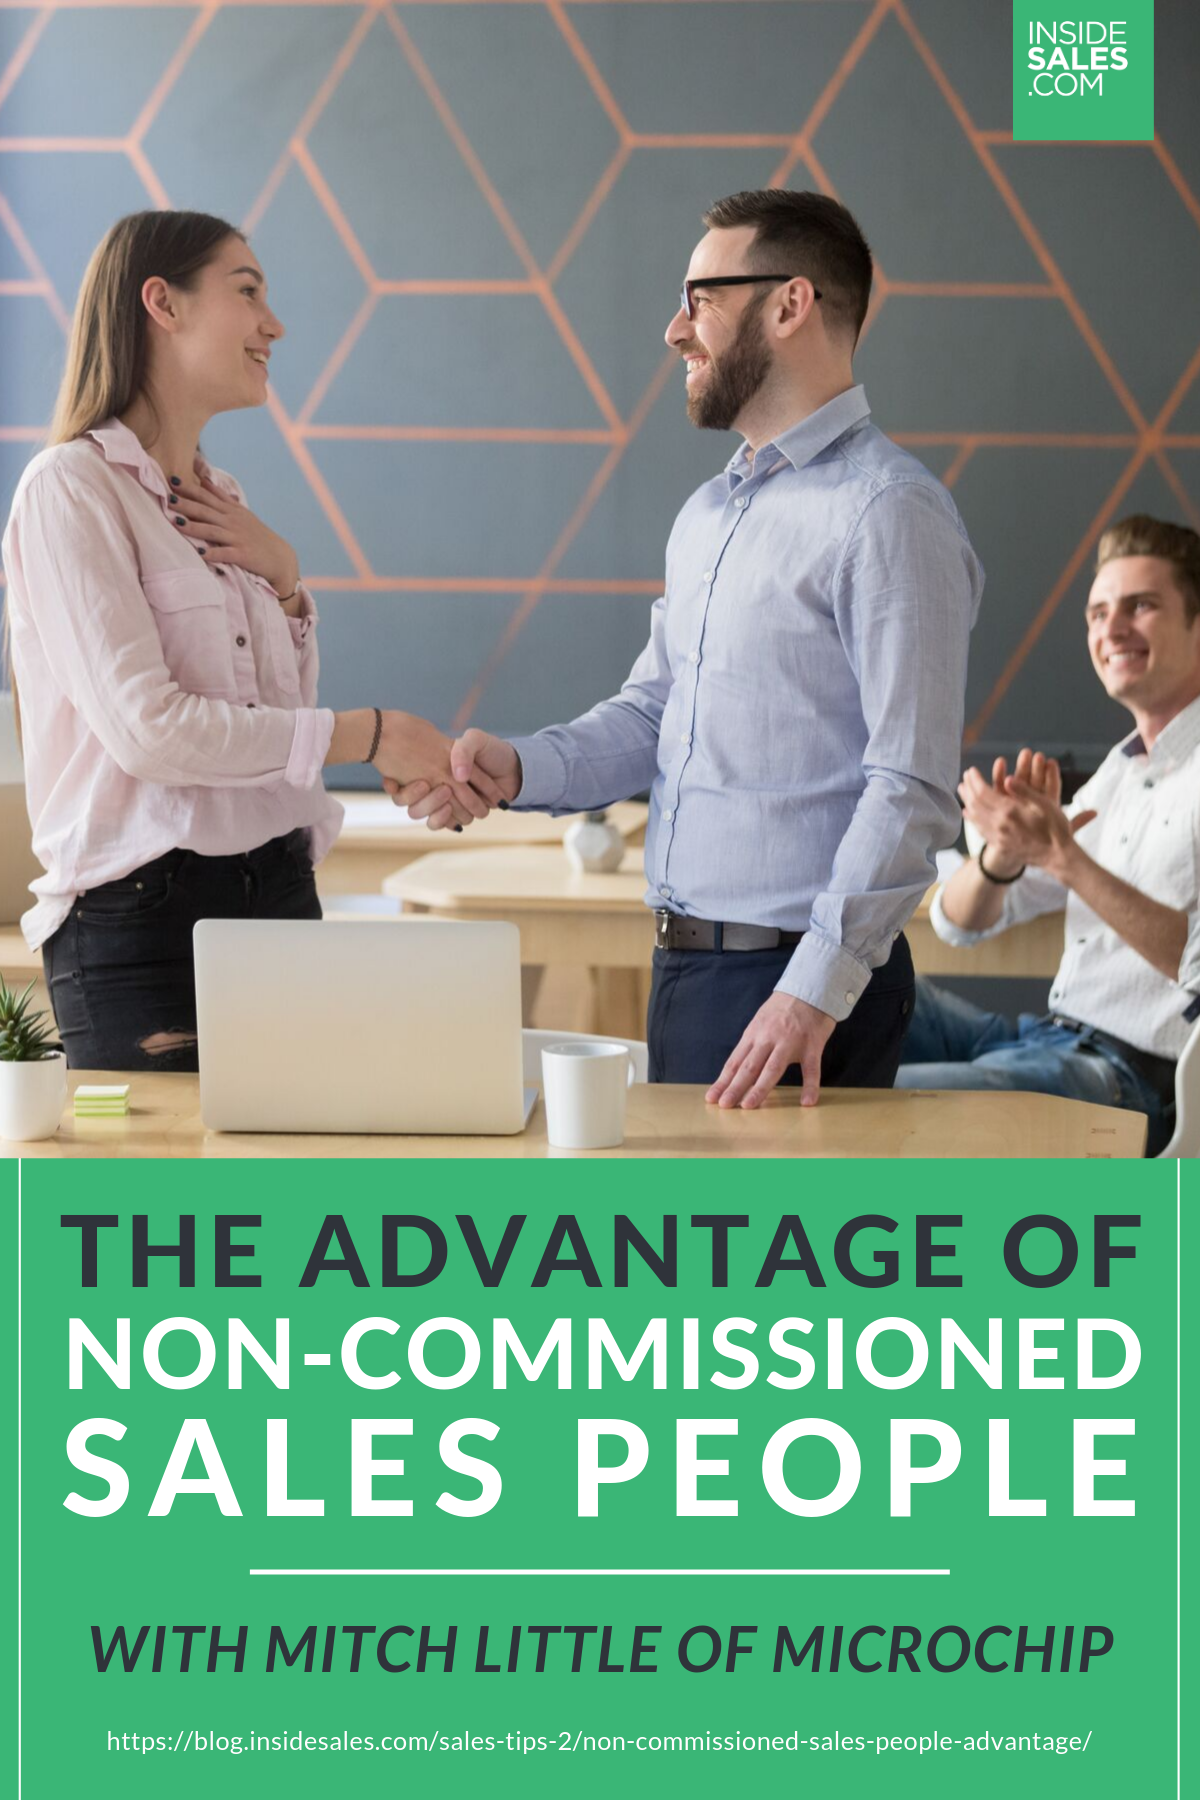 The Advantage Of Non-Commissioned Sales People w/Mitch Little @Microchip https://www.insidesales.com/blog/sales-tips-2/non-commissioned-sales-people-advantage/